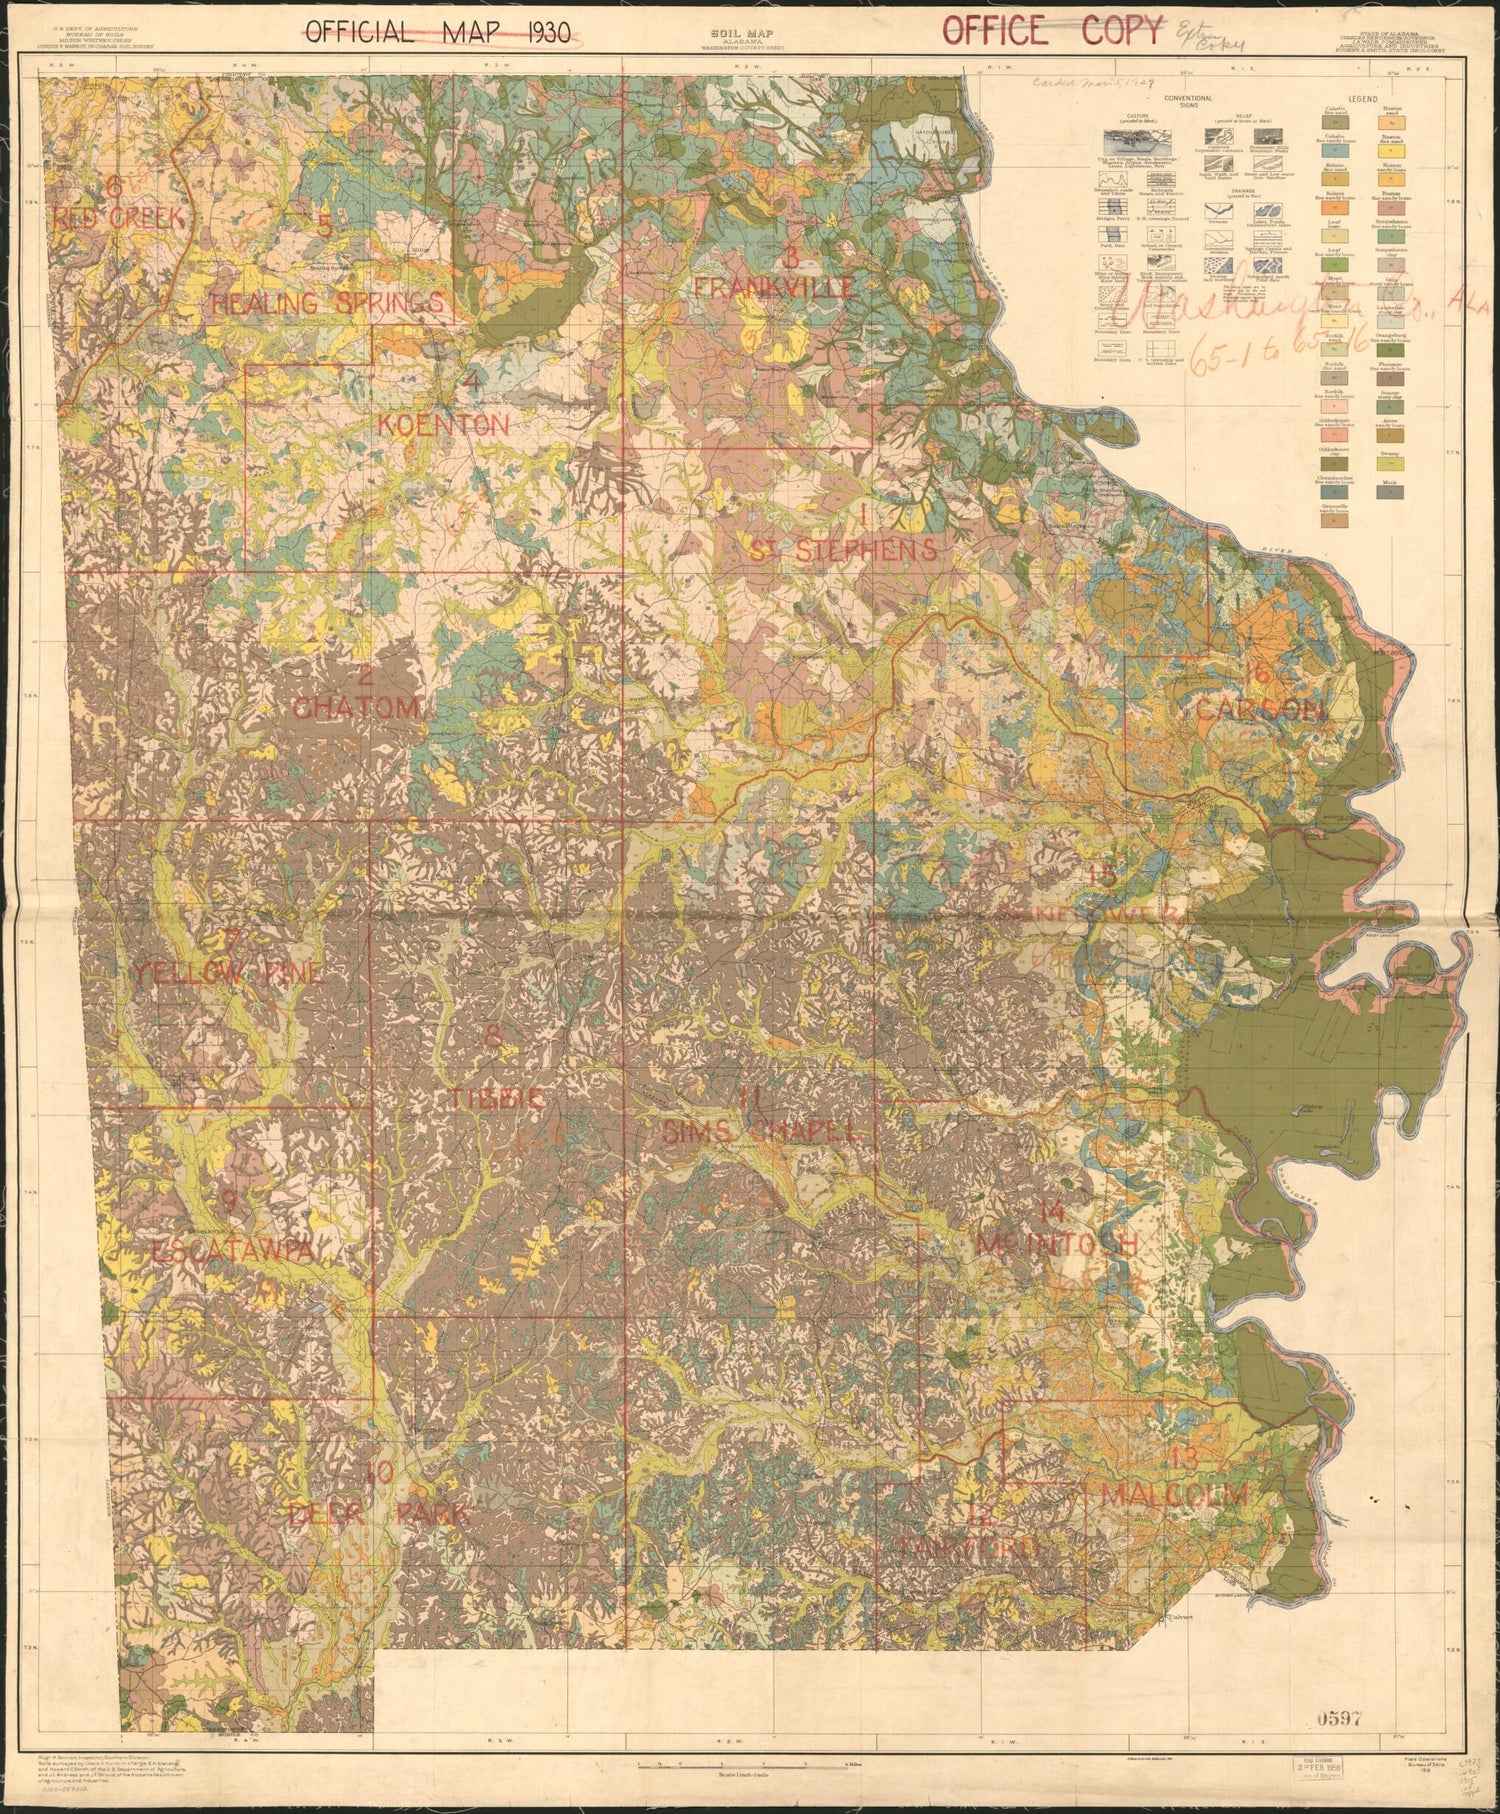 This old map of Soil Map, Alabama, Washington County Sheet from 1915 was created by  Alabama. Department of Agriculture and Industries,  United States. Bureau of Soils in 1915